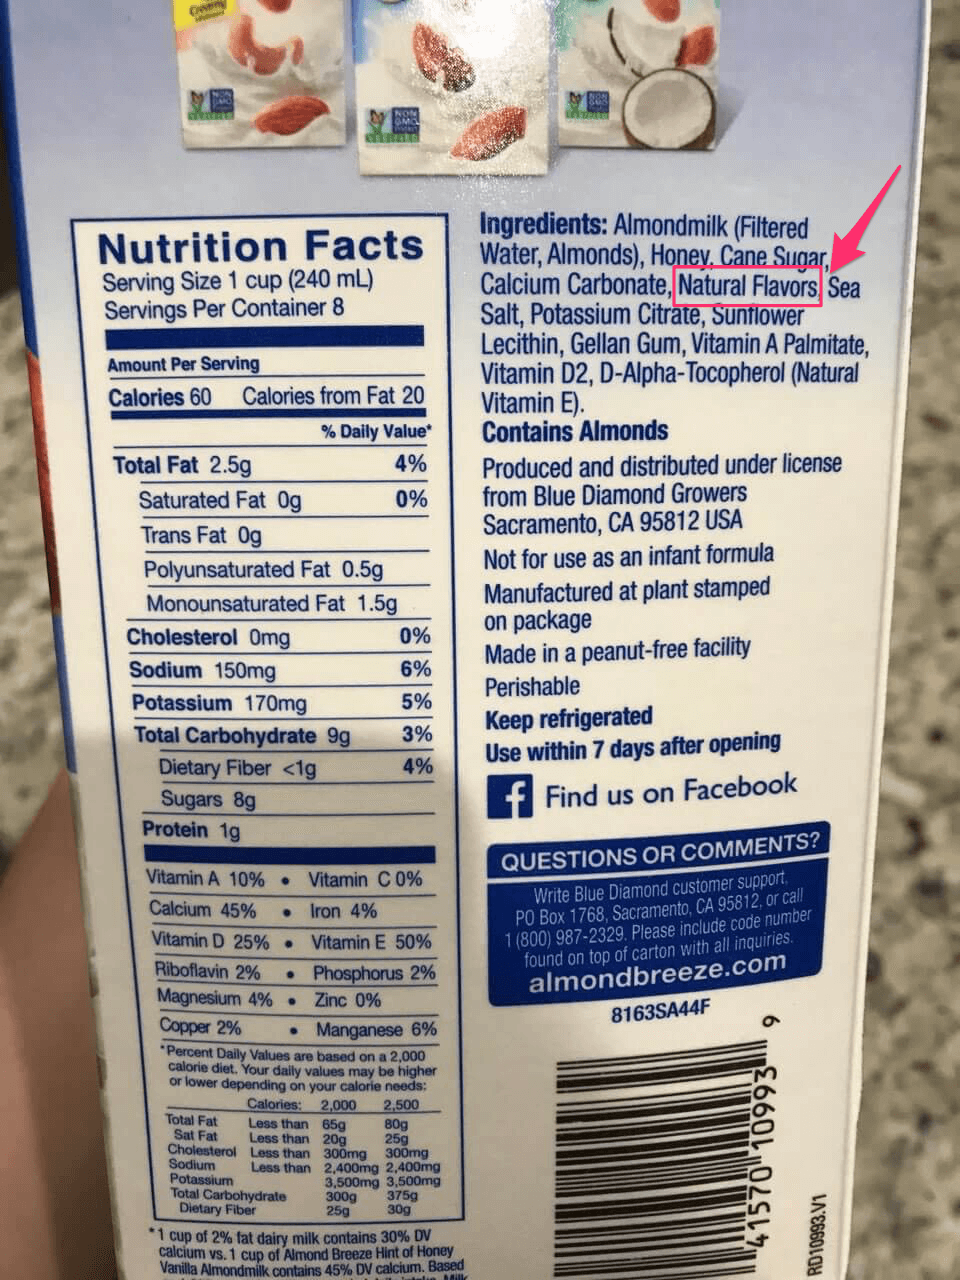 blue diamond almond breeze vanilla nutrition facts label highlighting natural flavors